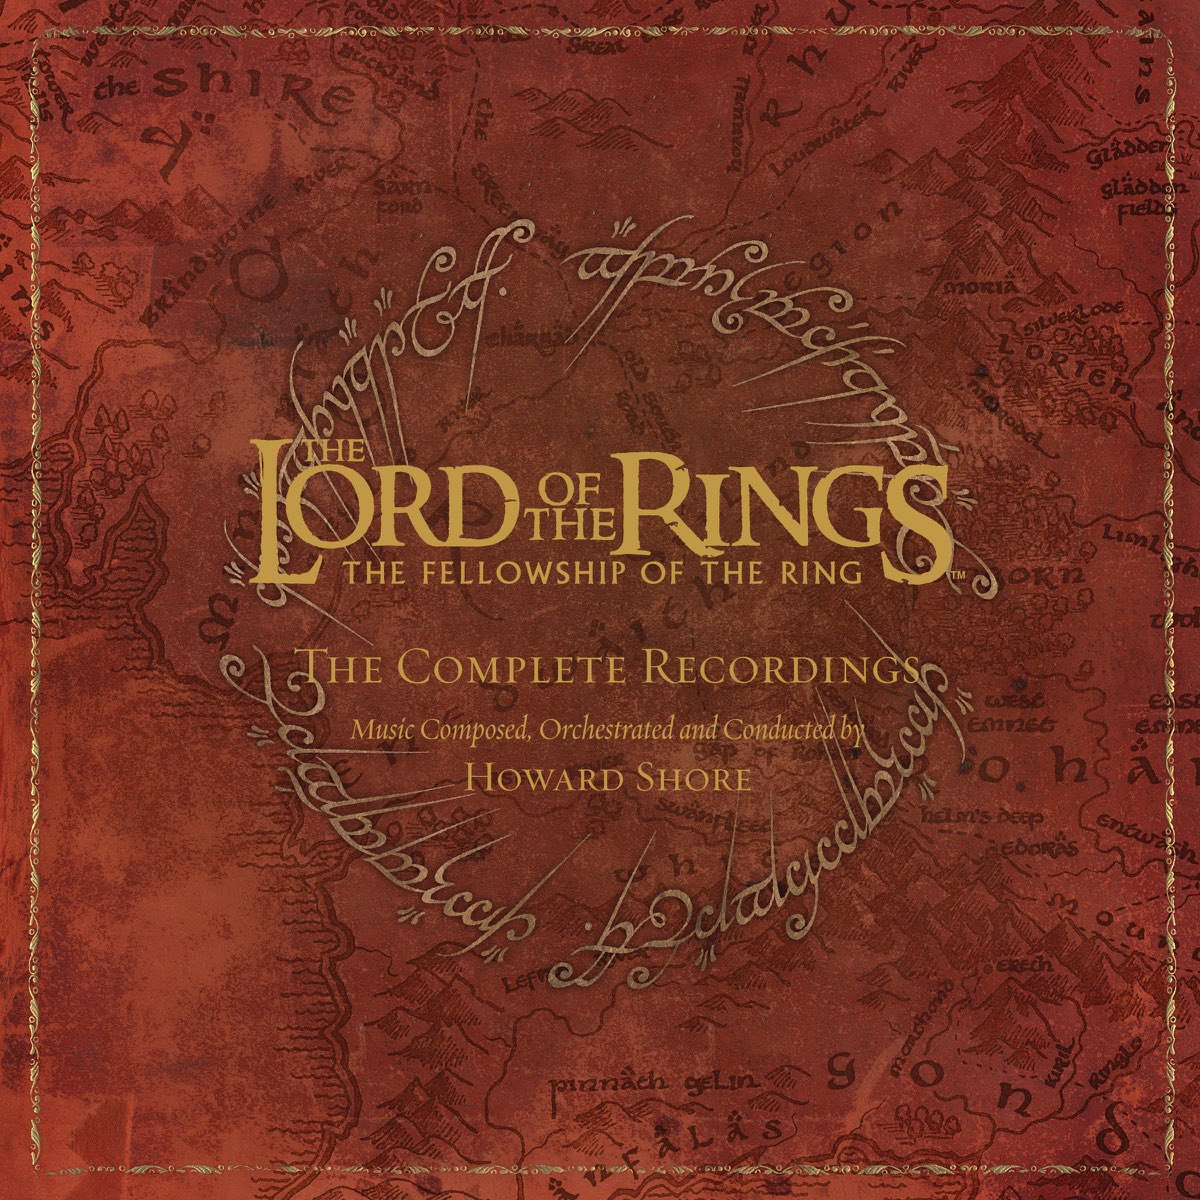 The Lord of the Rings: The Fellowship of the Ring - The Complete Recordings  by Howard Shore on Apple Music